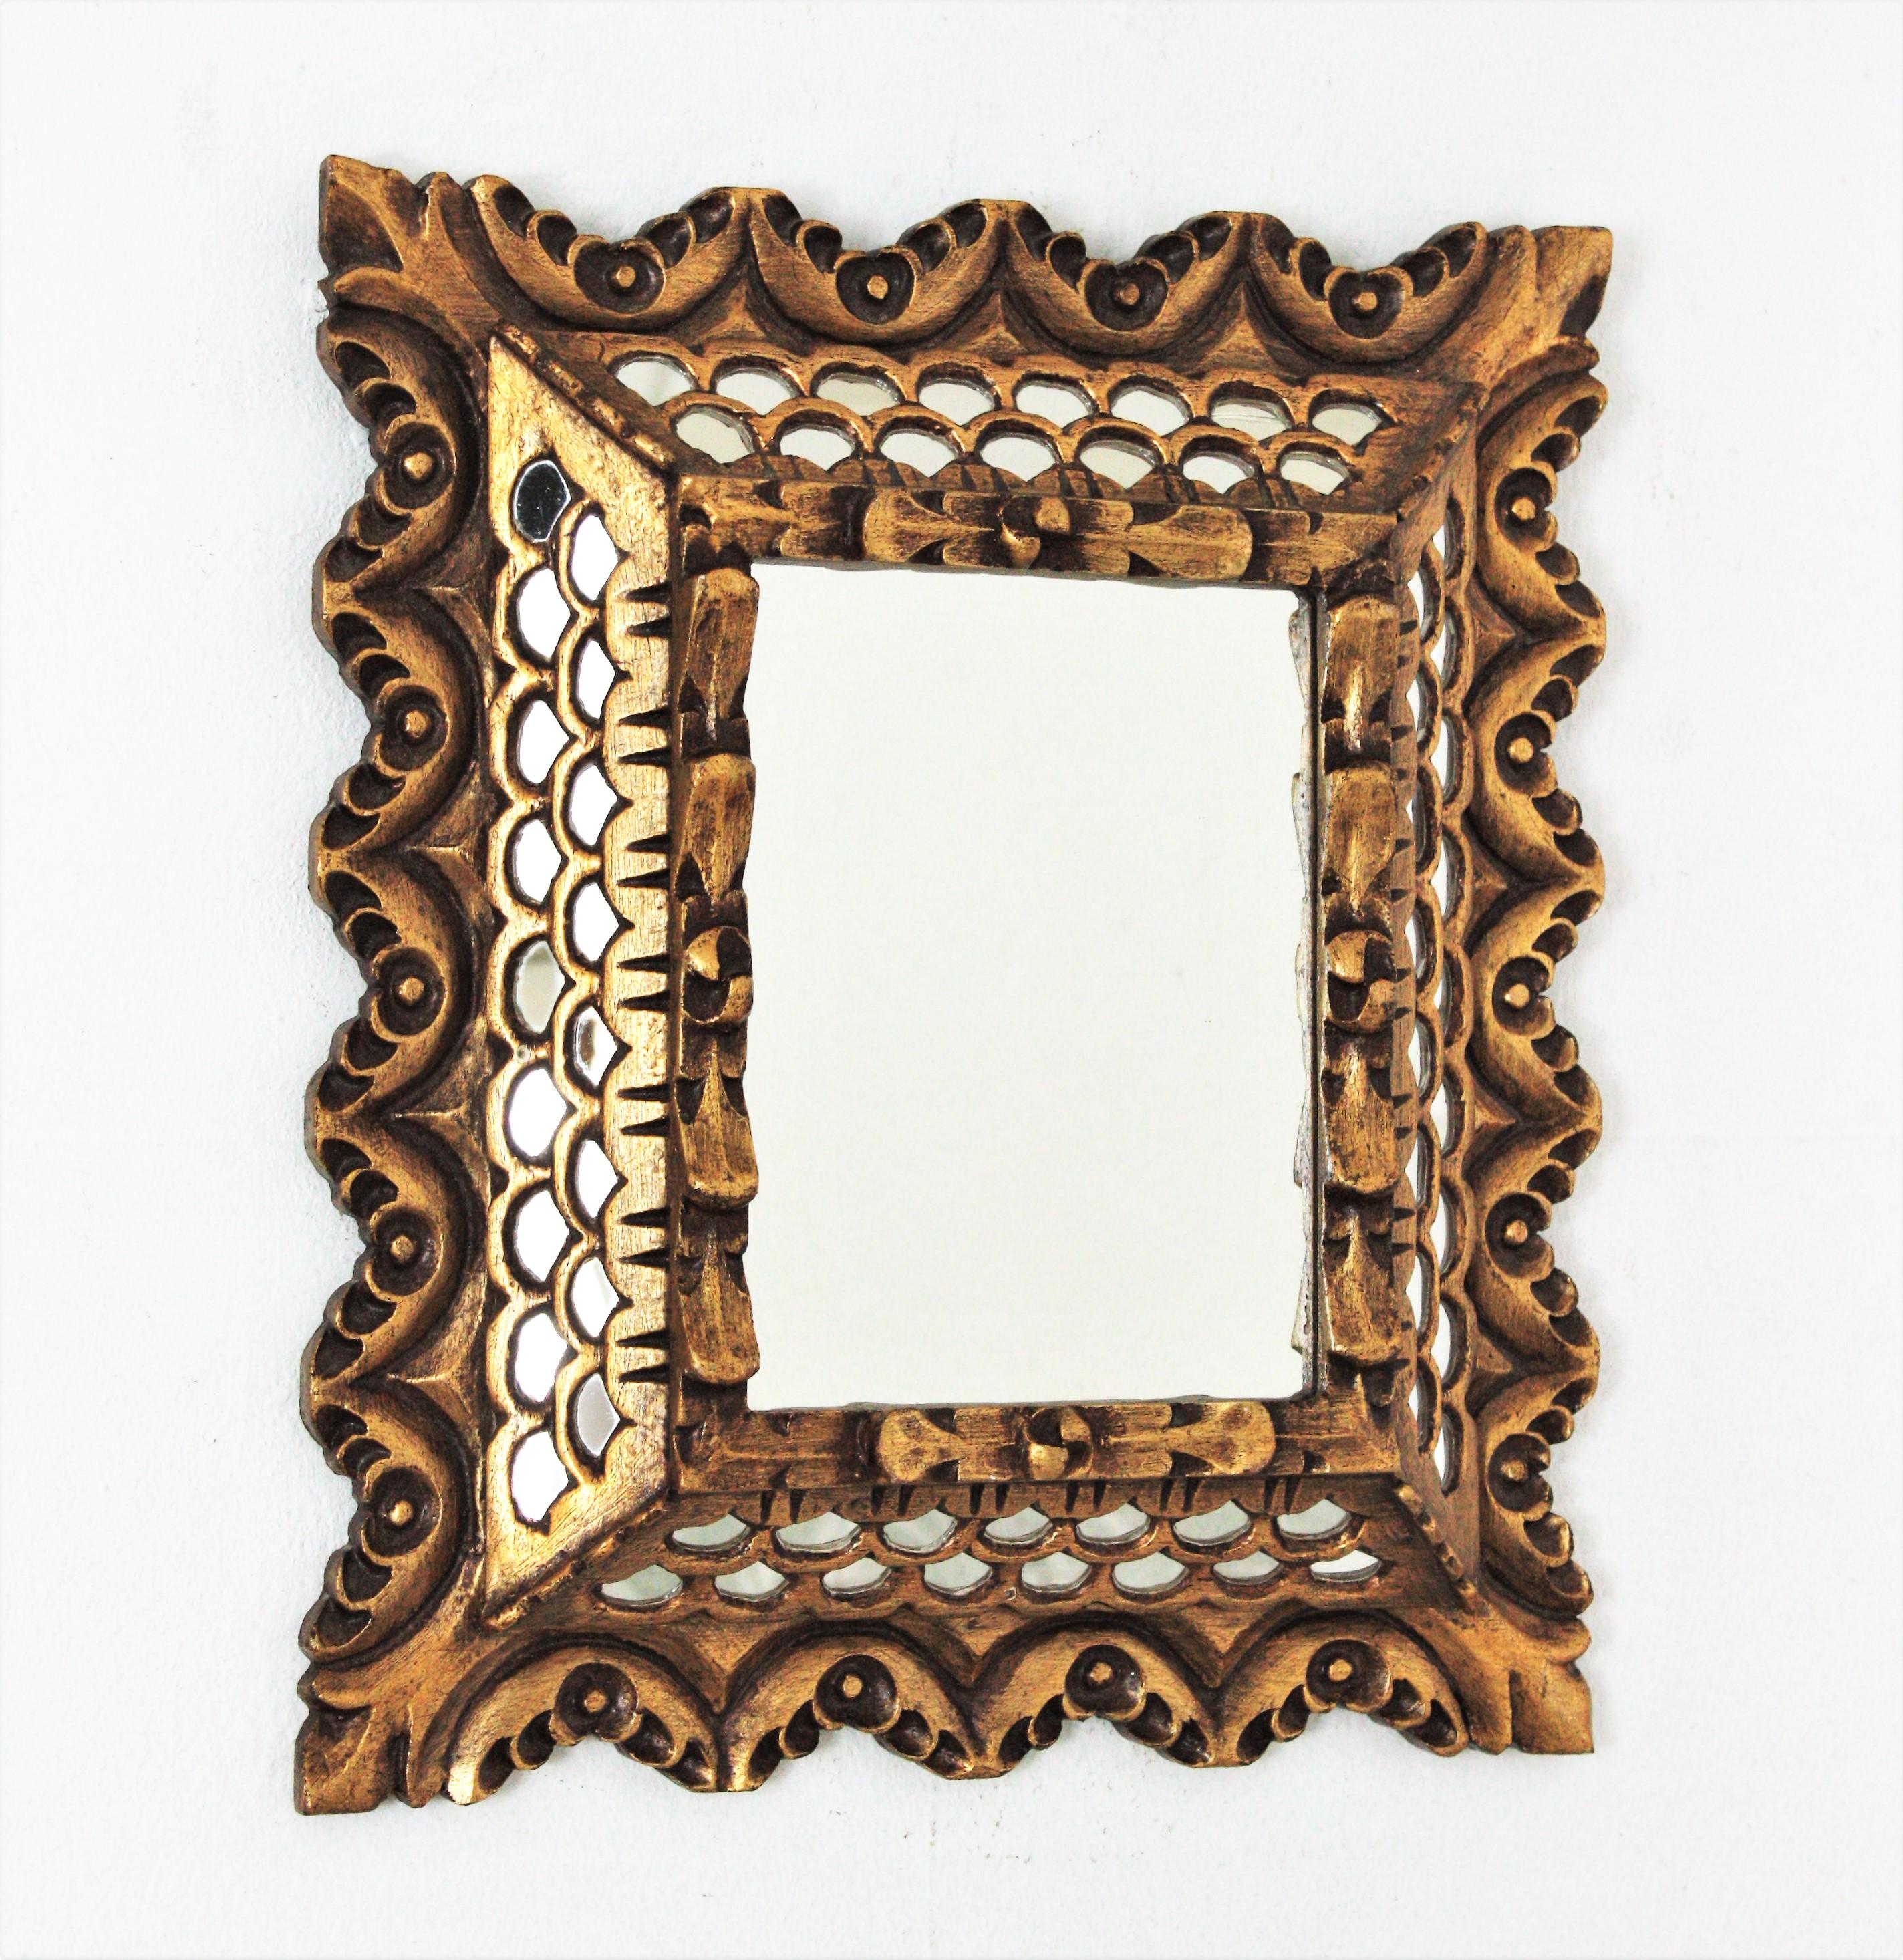 Spanish Colonial style gilt wood scalloped rectangular mirror with mirror insets in the frame, 1960s
This lovely wall mirror has two layers of mirrors surrounding the central glass, scalloped edges and carving decorative details thorought.
Original